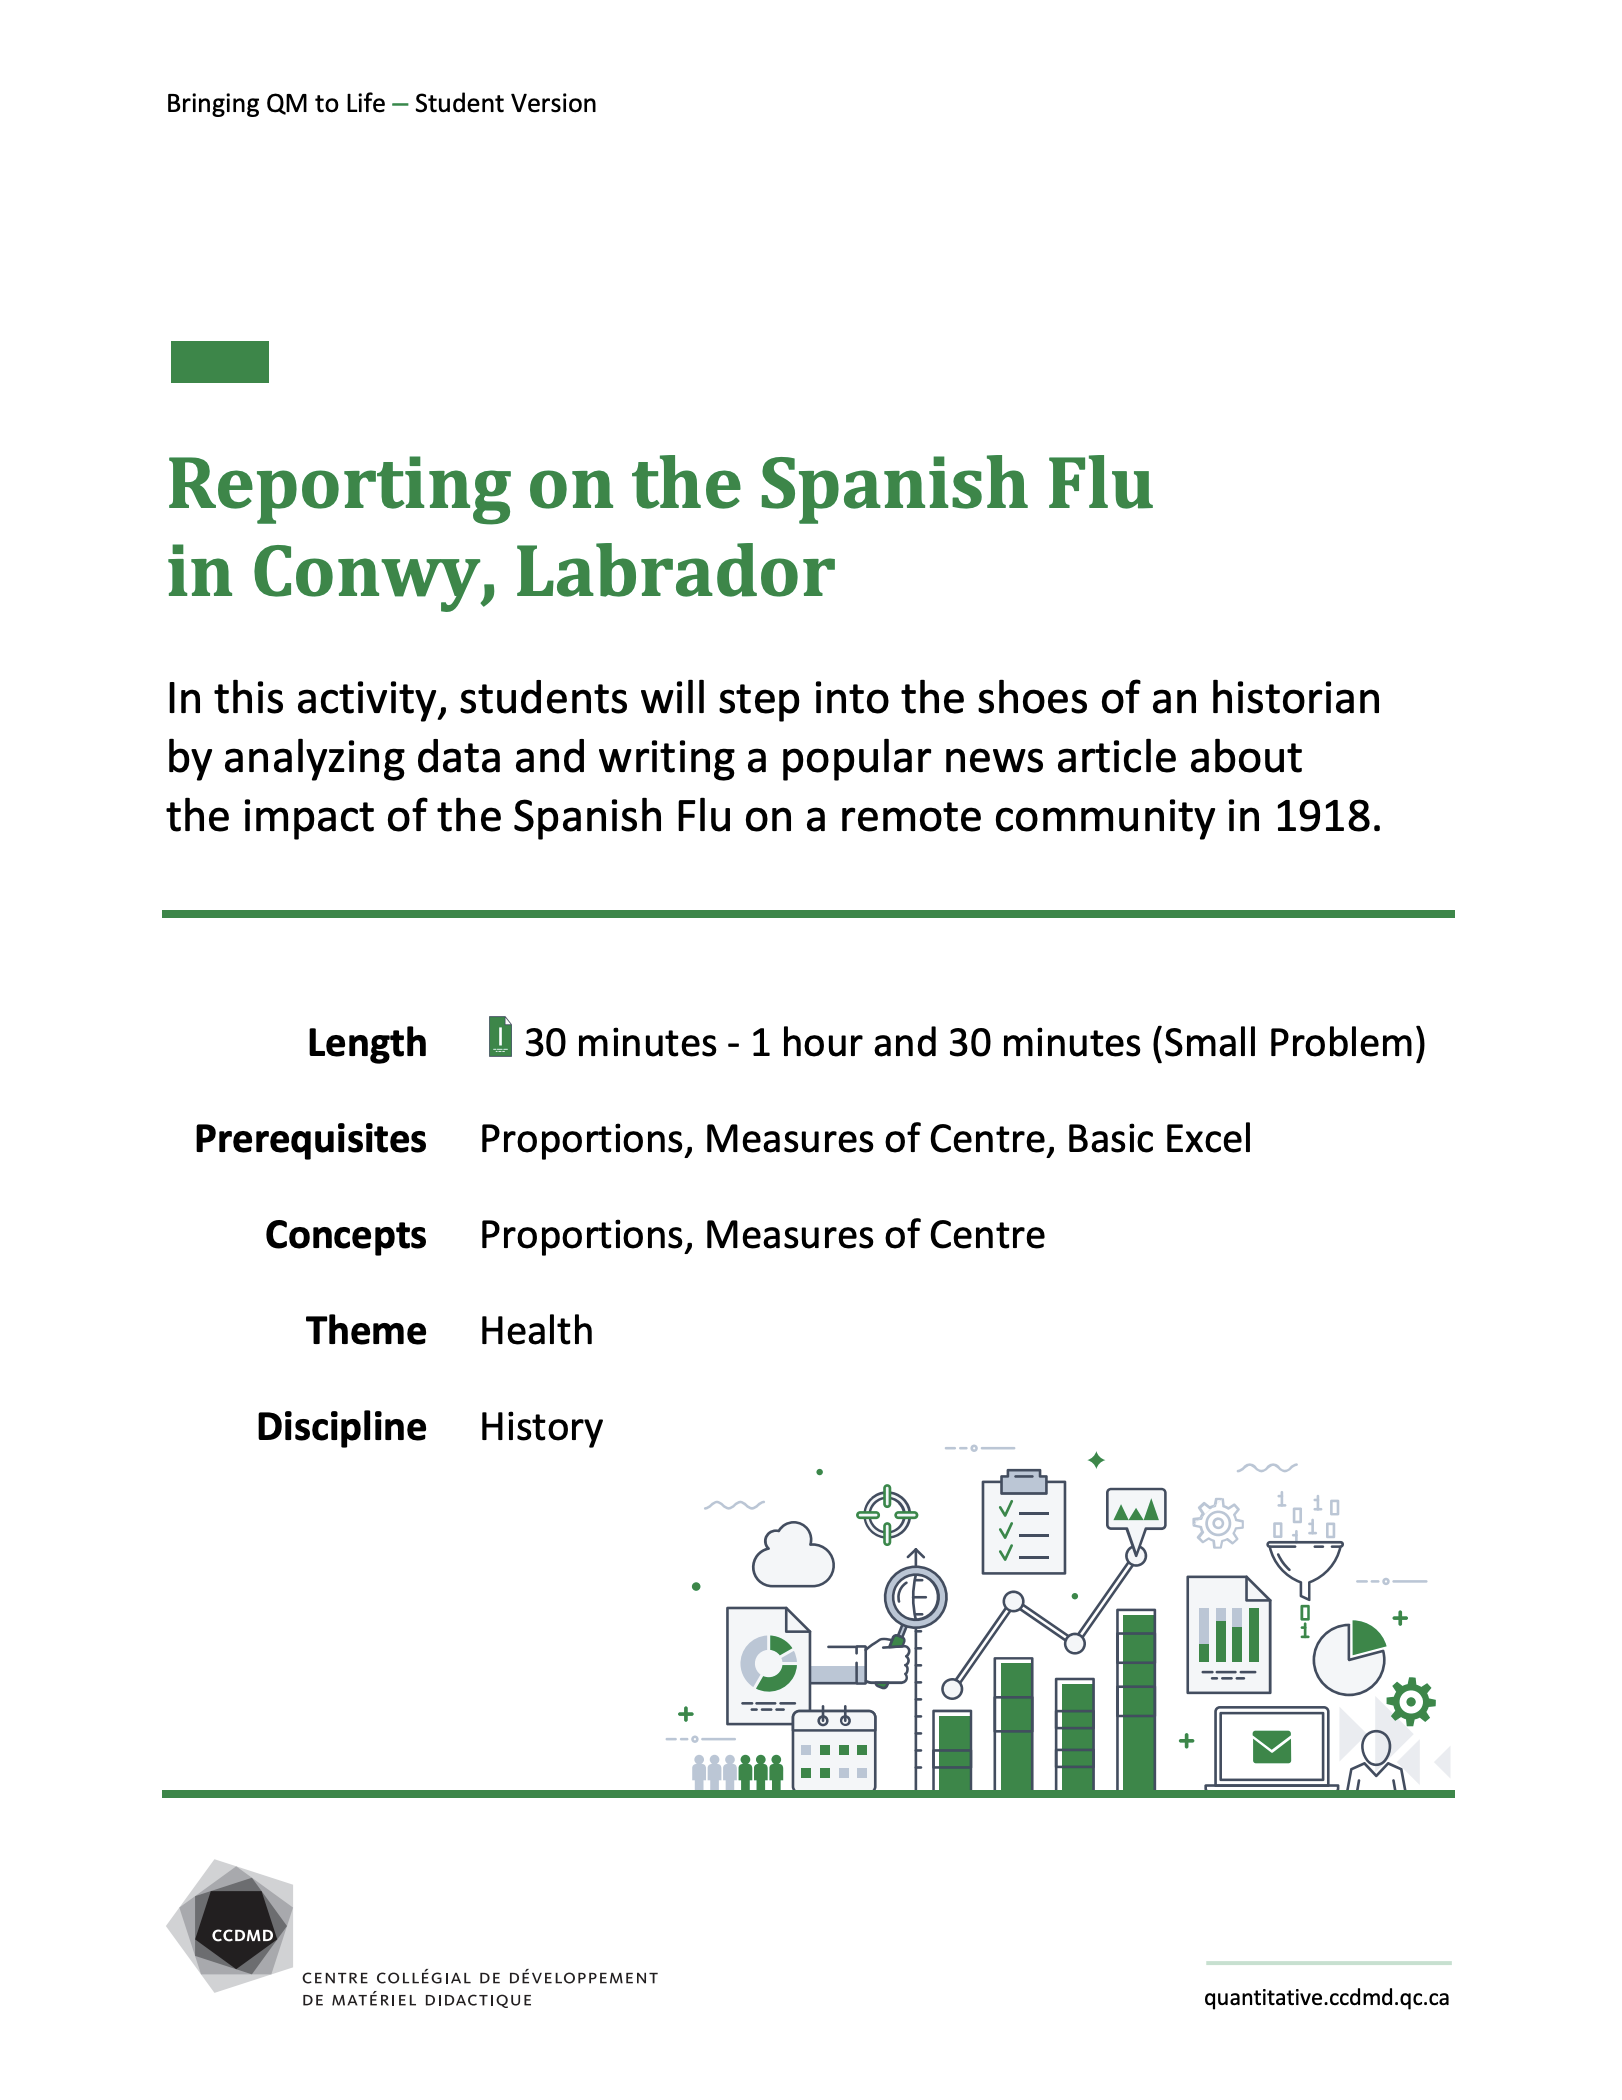 Reporting on the Spanish Flu in Conwy, Labrador